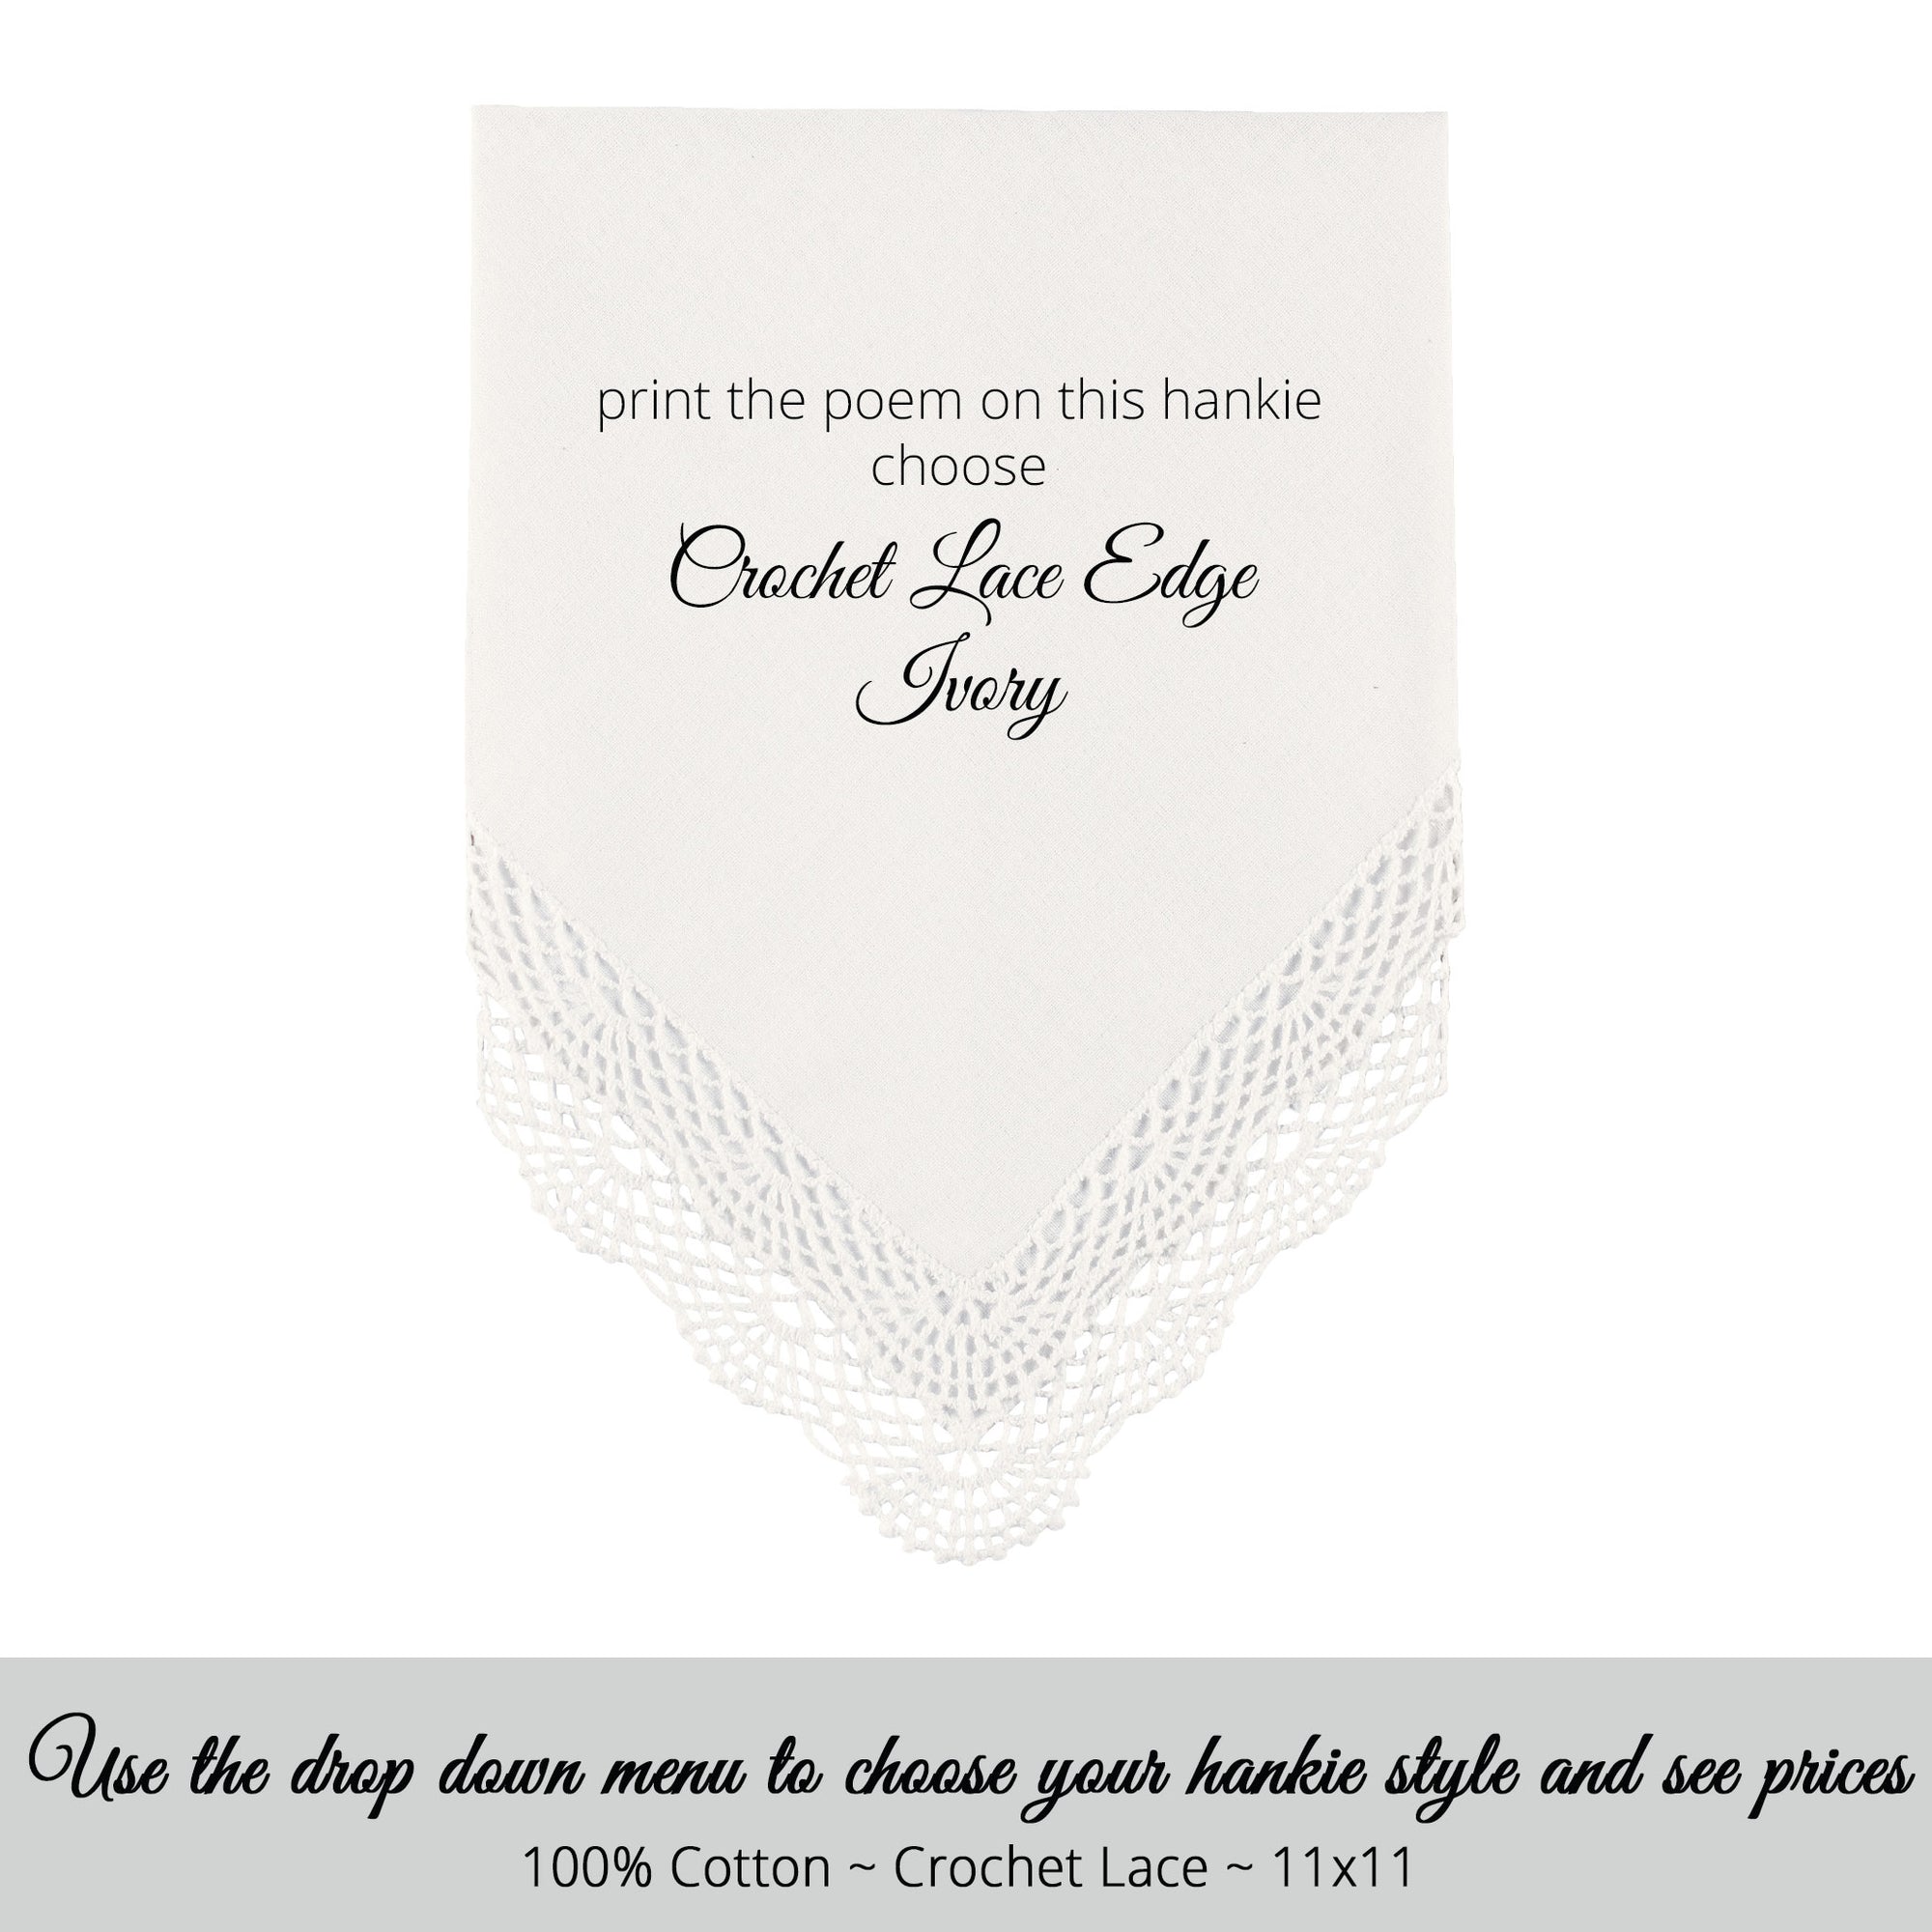 Wedding handkerchief ivory with crochet lace edge for the poem printed hankie